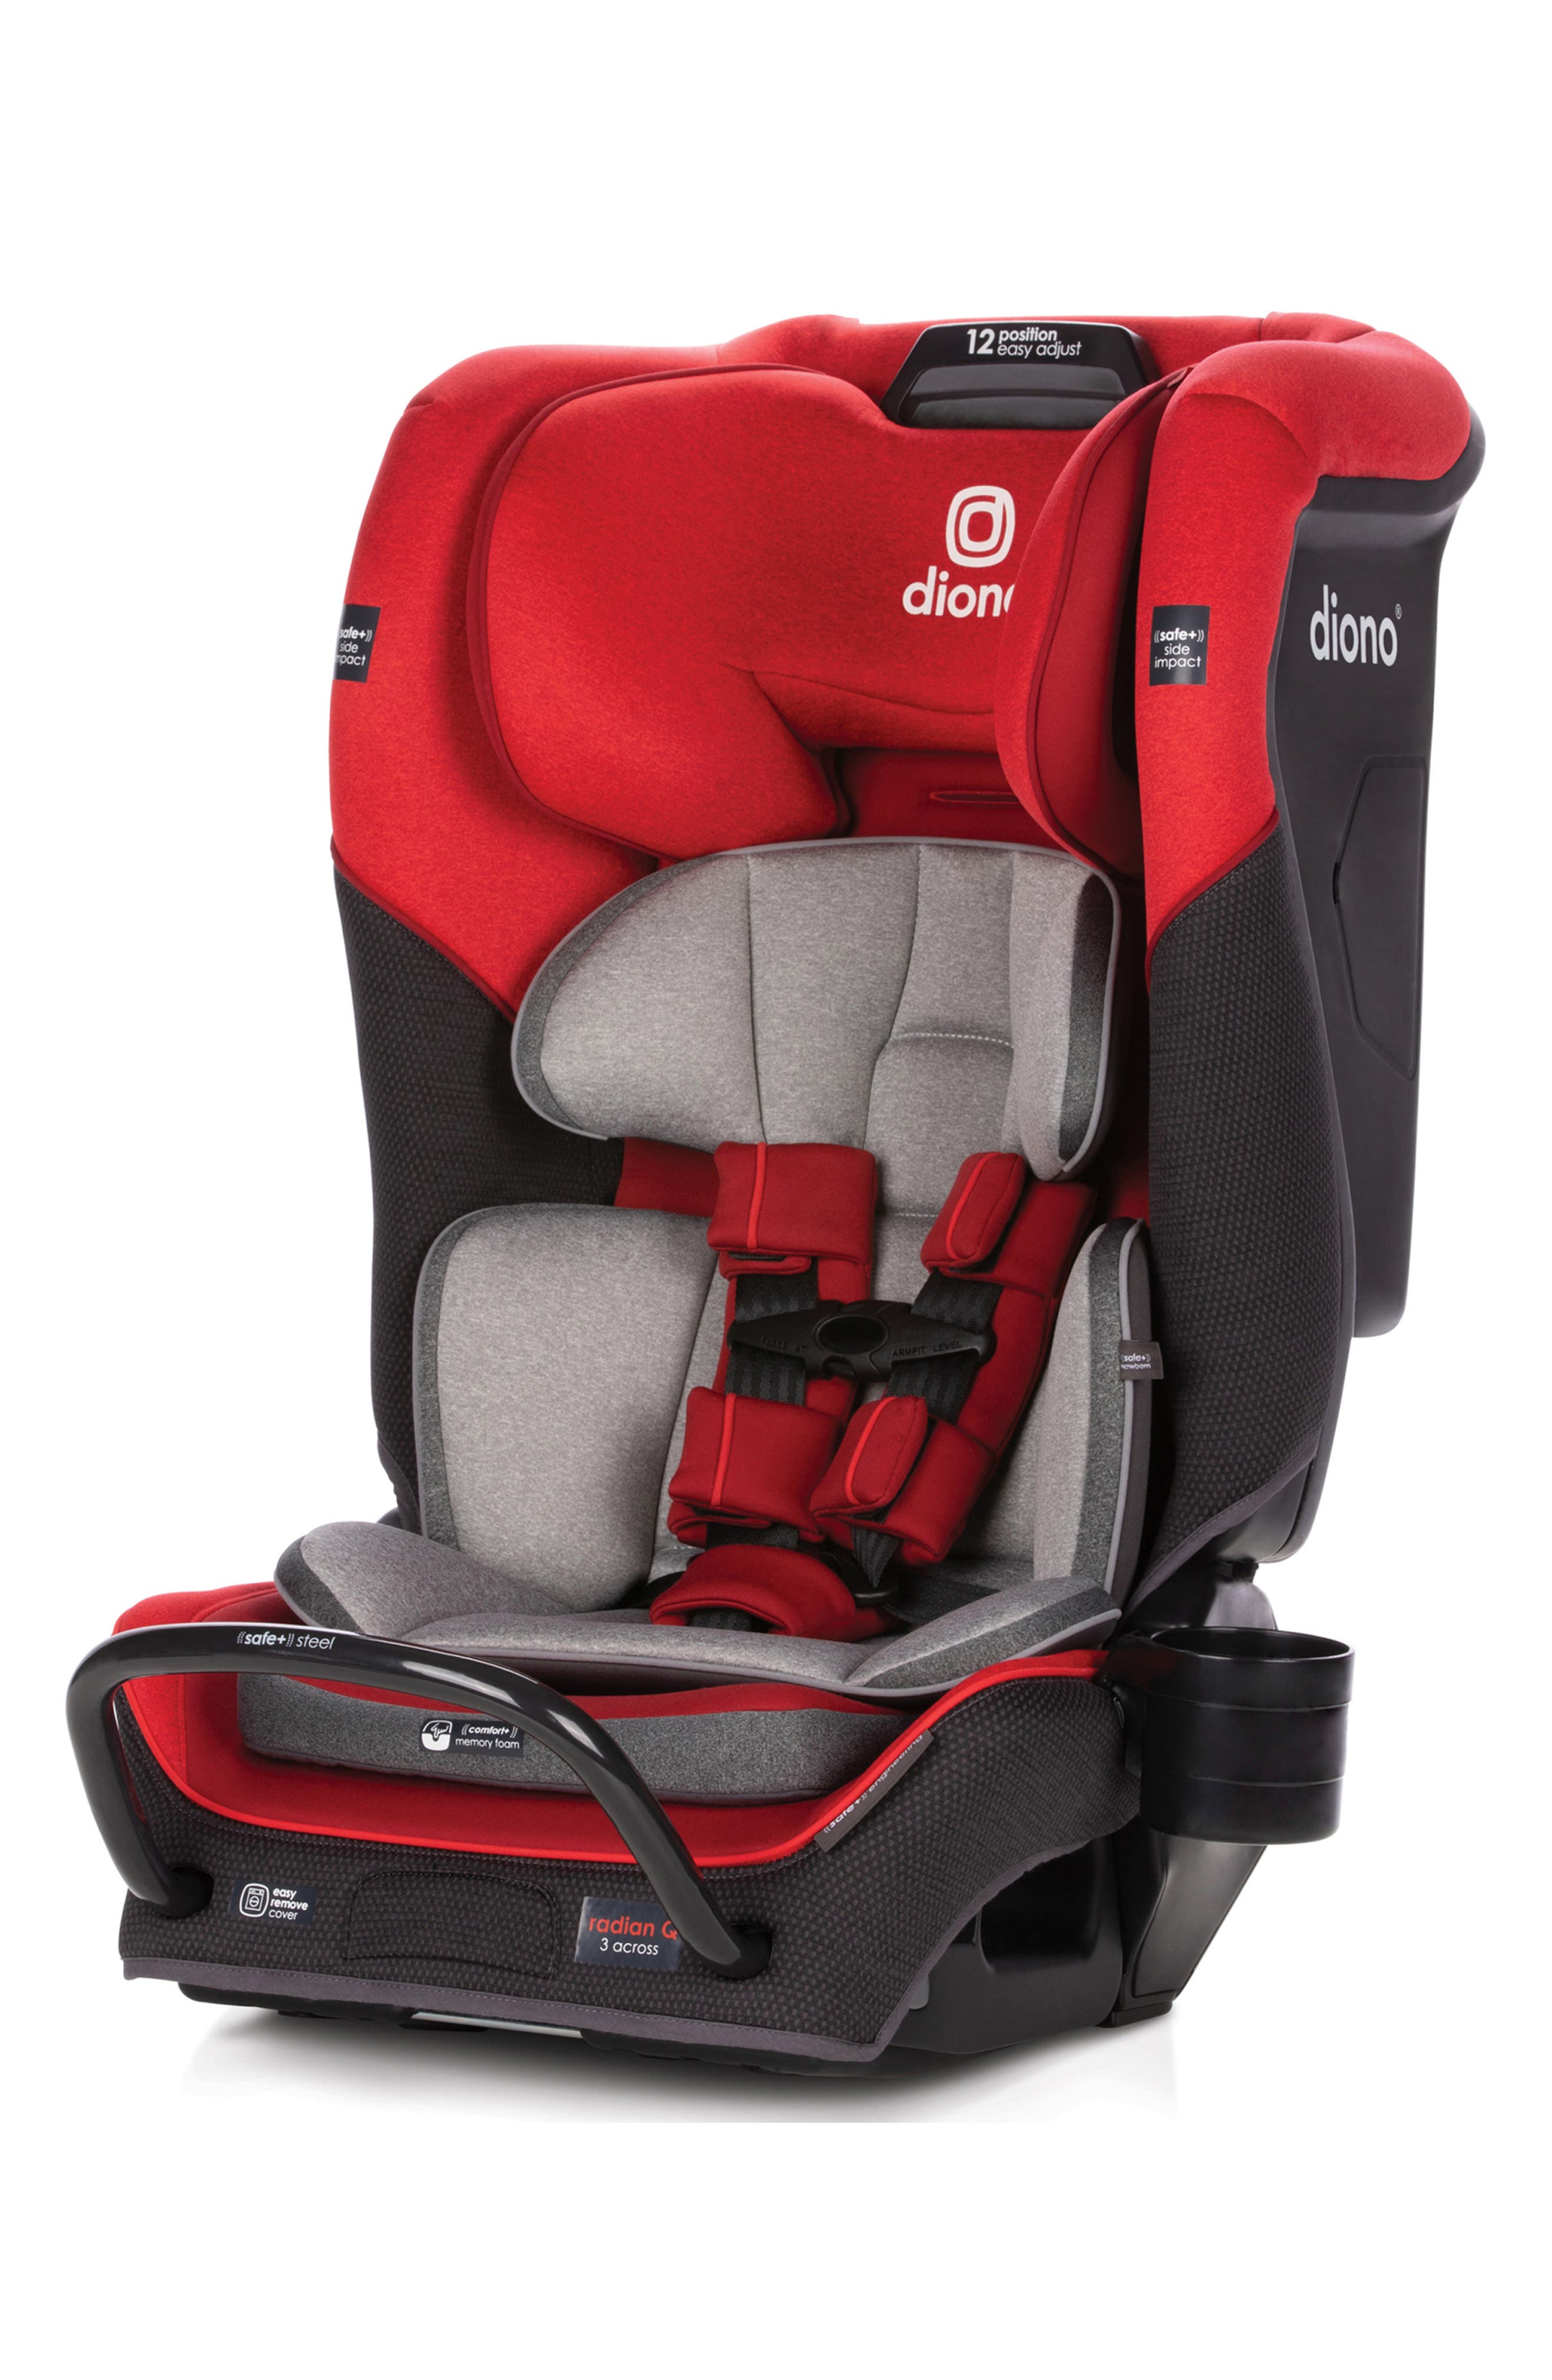 Diono radian(R) 3QX All-in-One Convertible Car Seat in Red Cherry